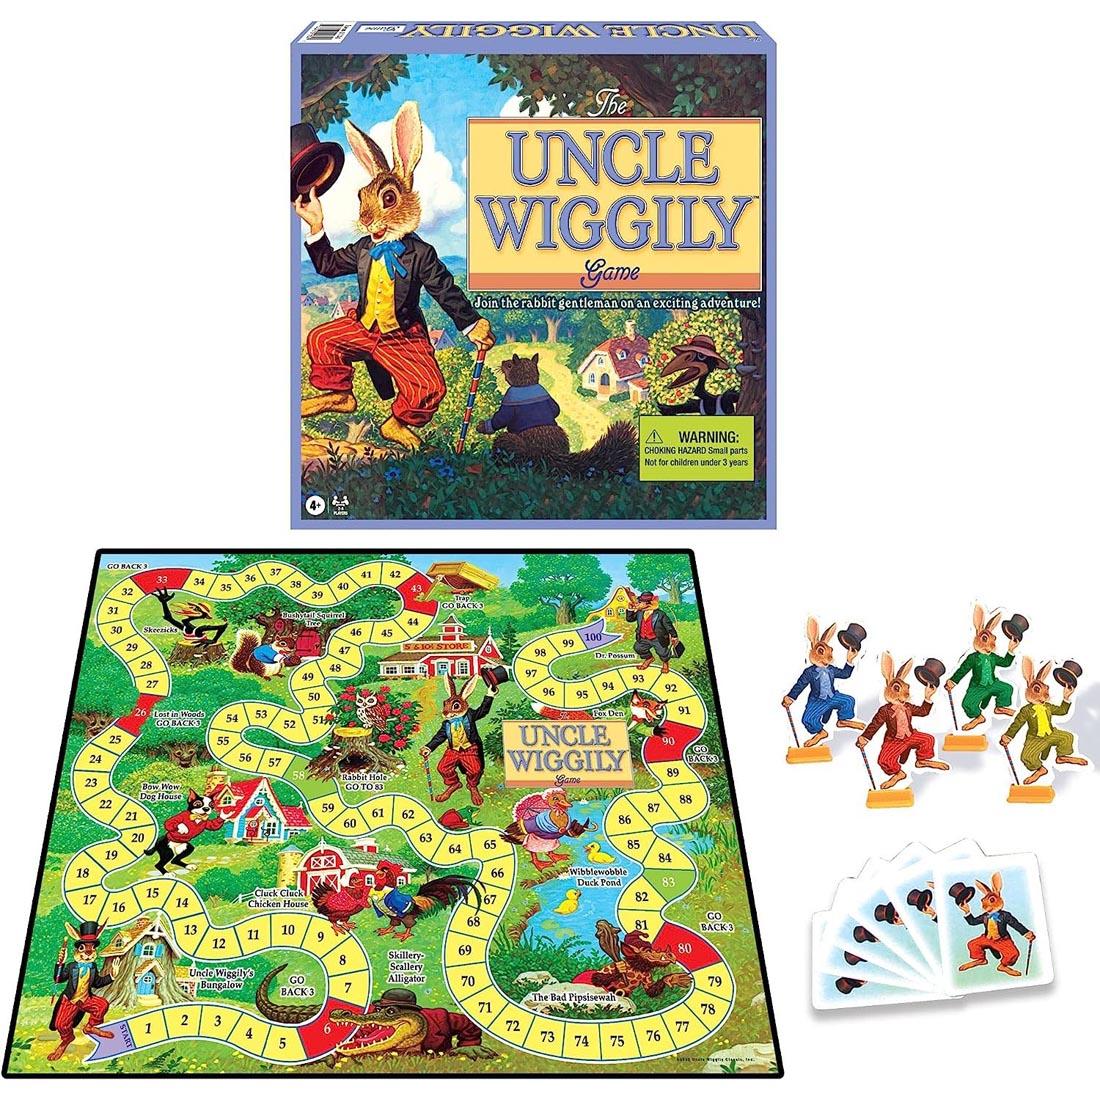 box and contents of Uncle Wiggily Board Game